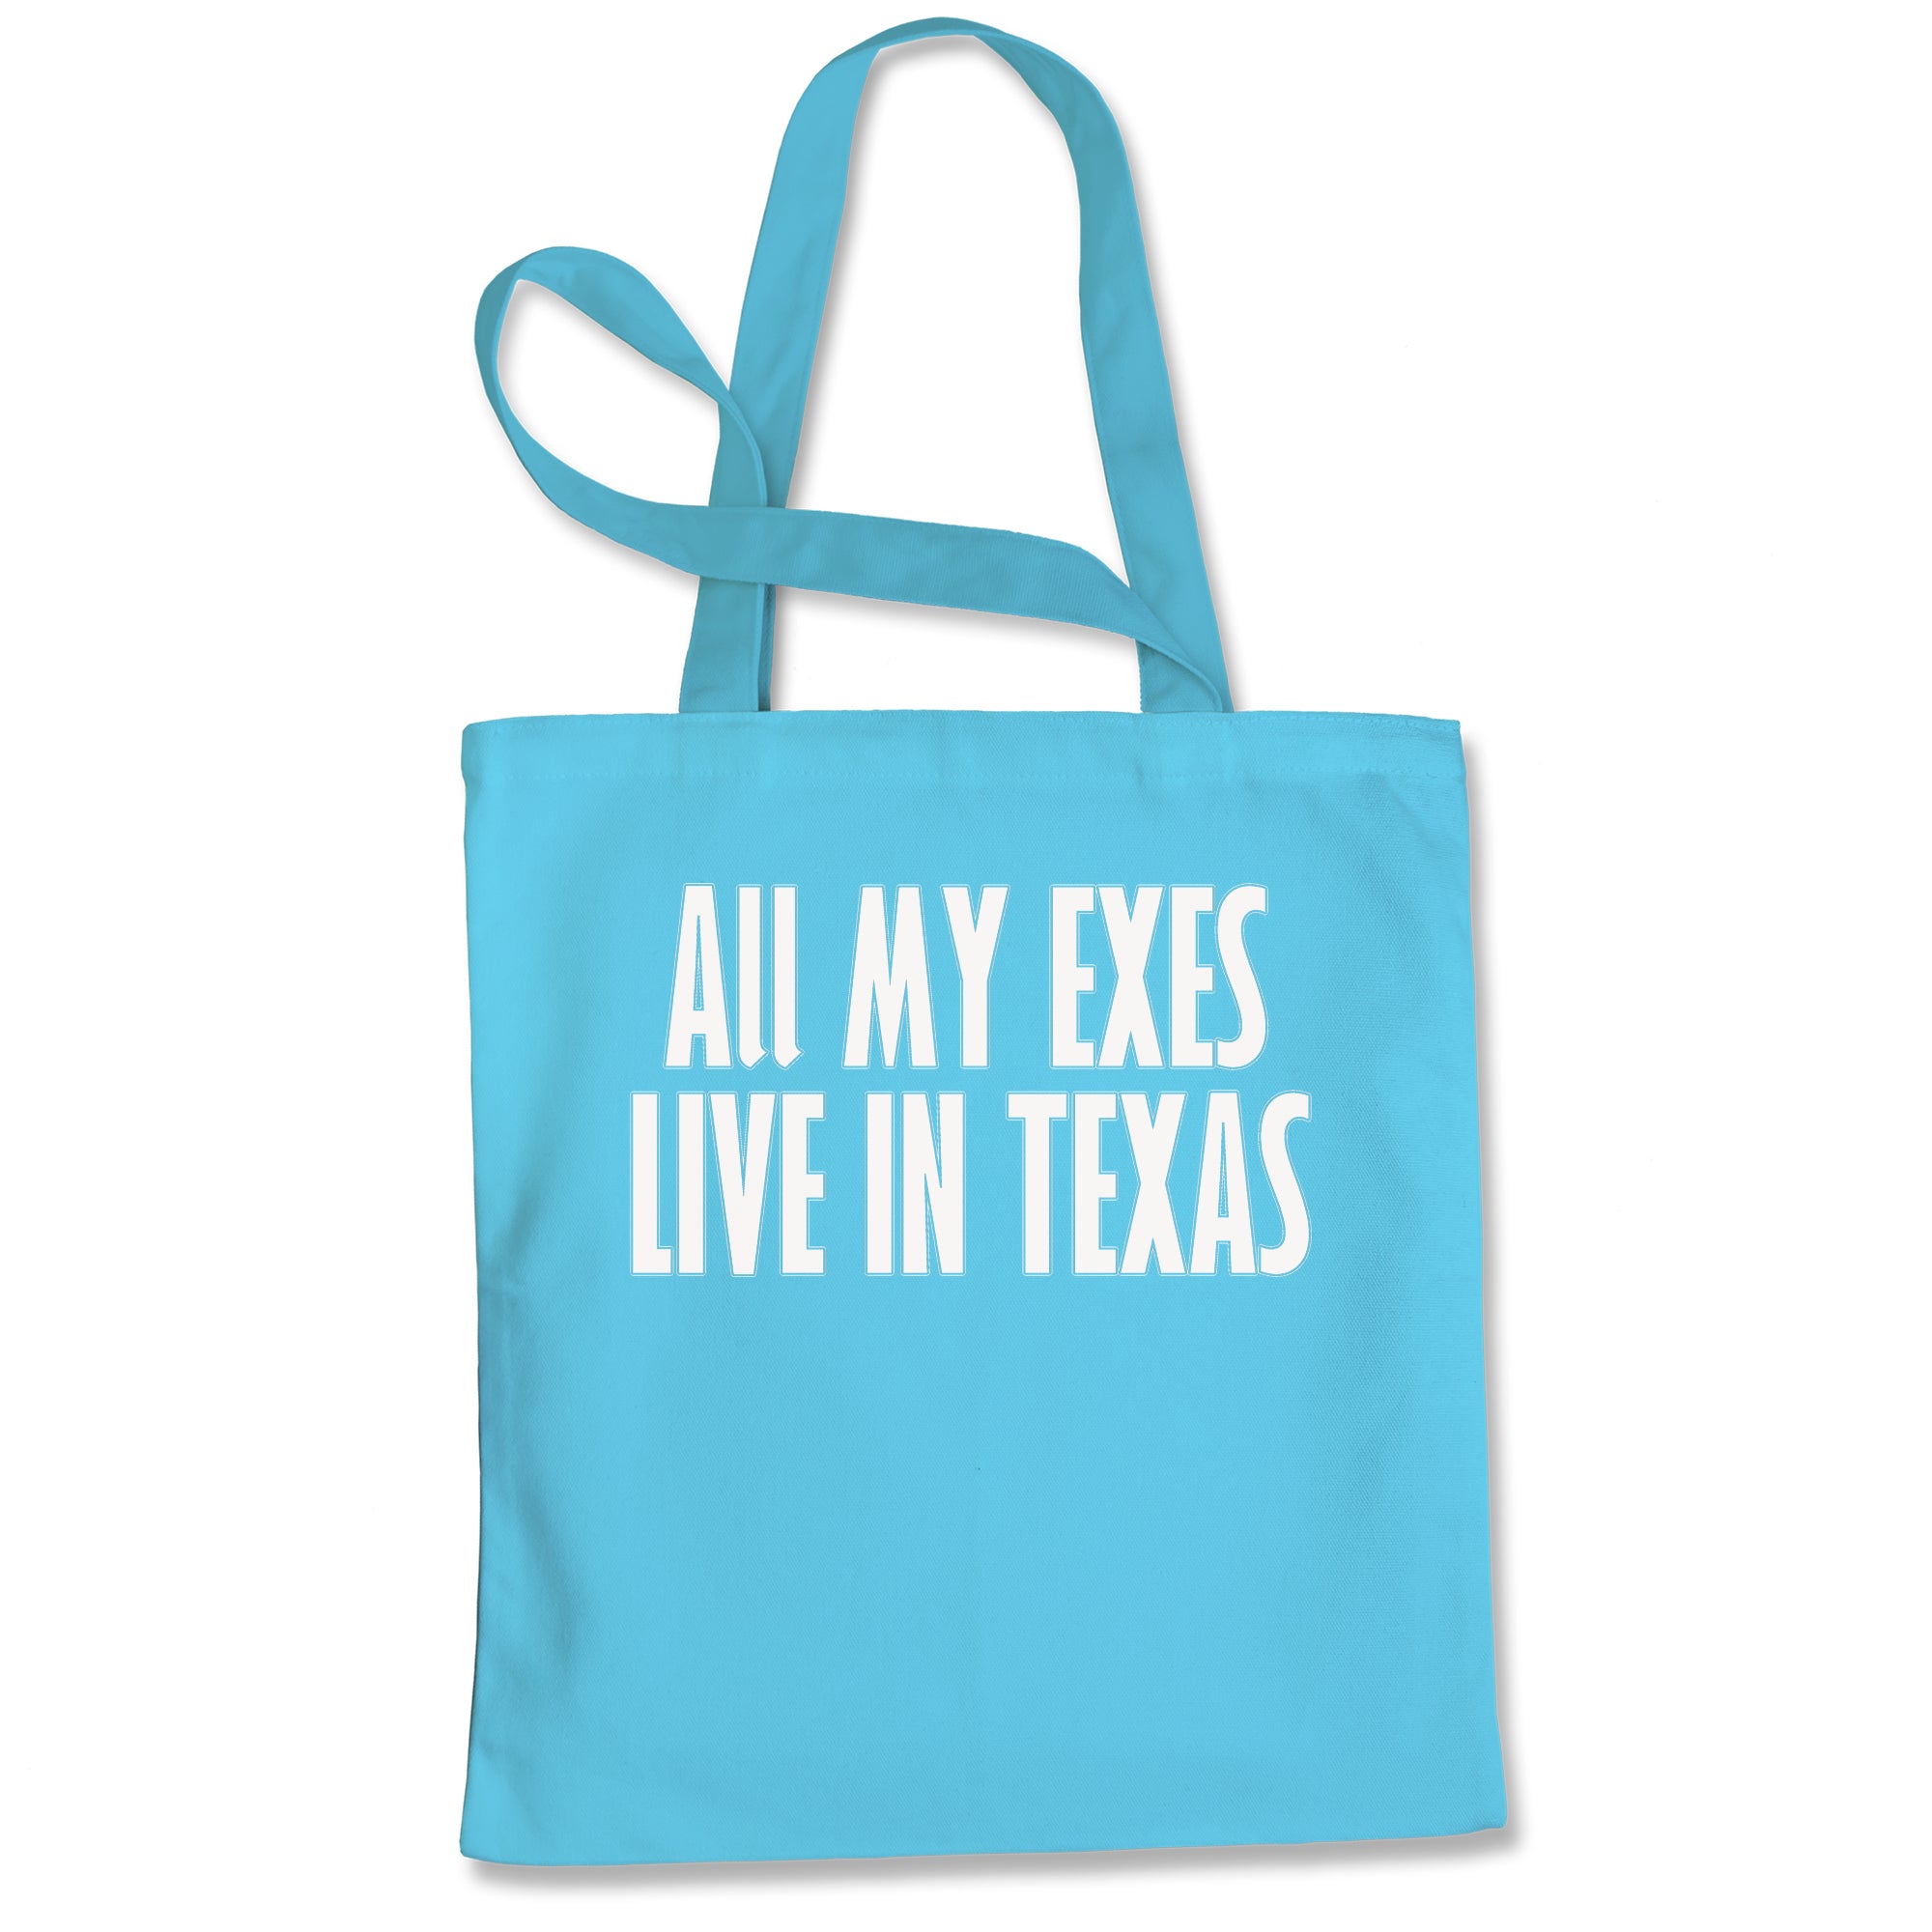 All My Exes Live In Texas Tote Bag